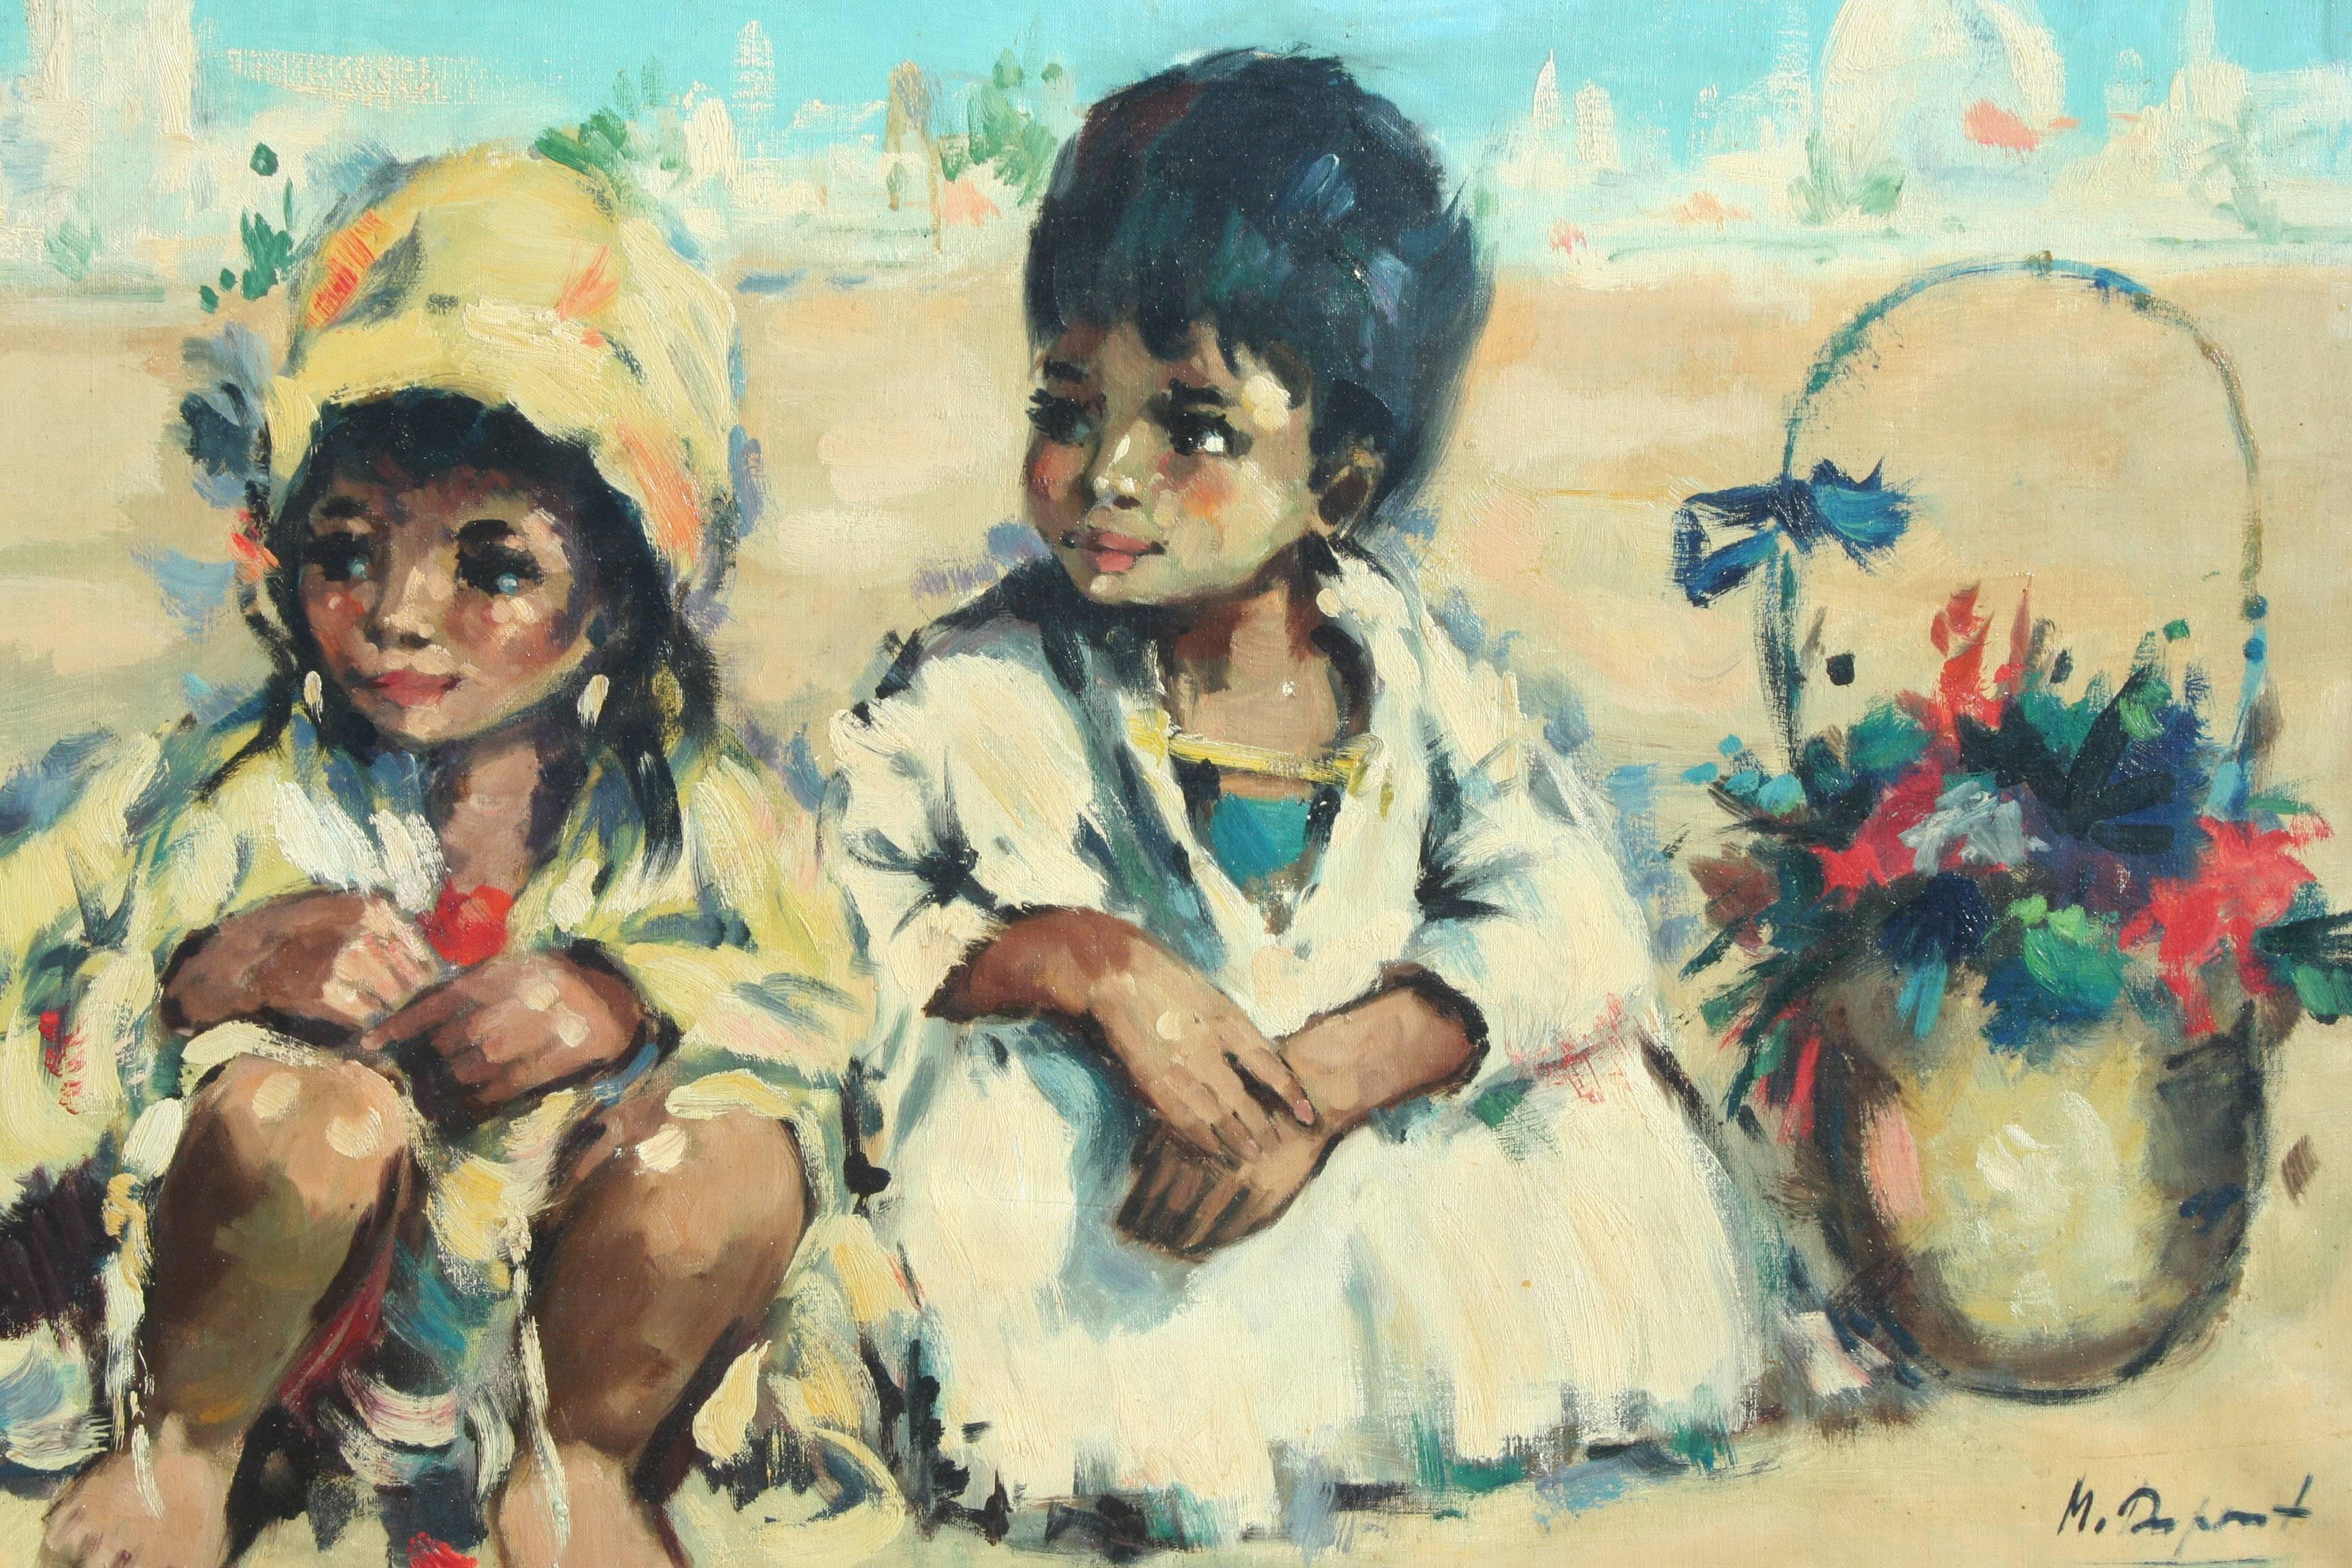 Flower Children, Morocco - Painting by Maurice Dupont